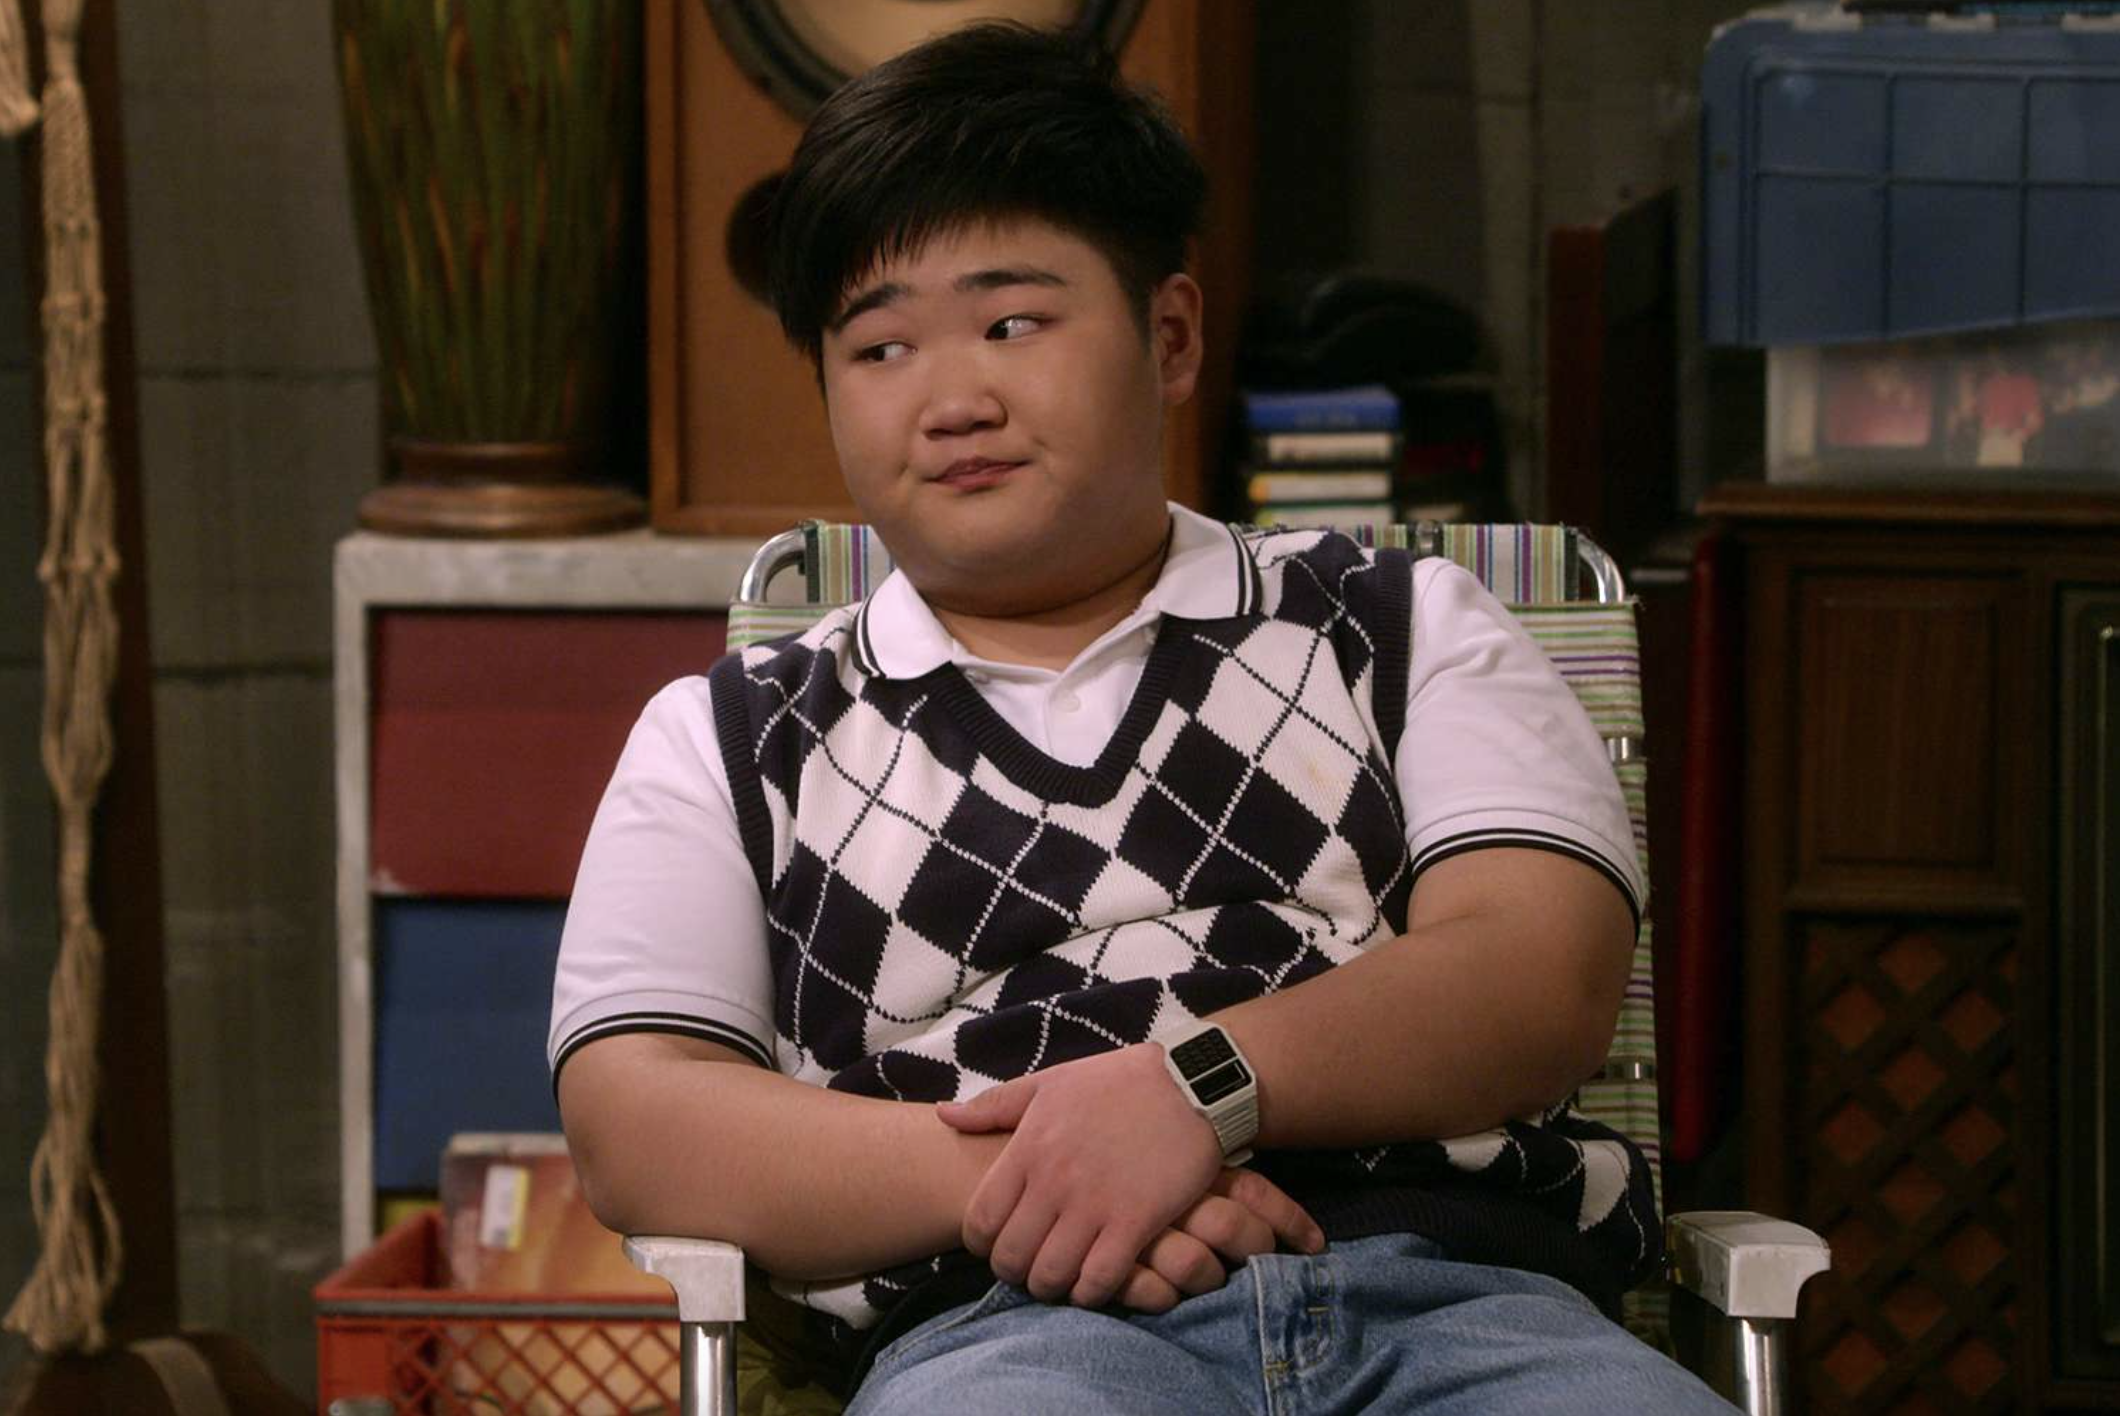 Reyn Doi On His Role In ‘That ’90s Show’ & The Show’s Future – Interview